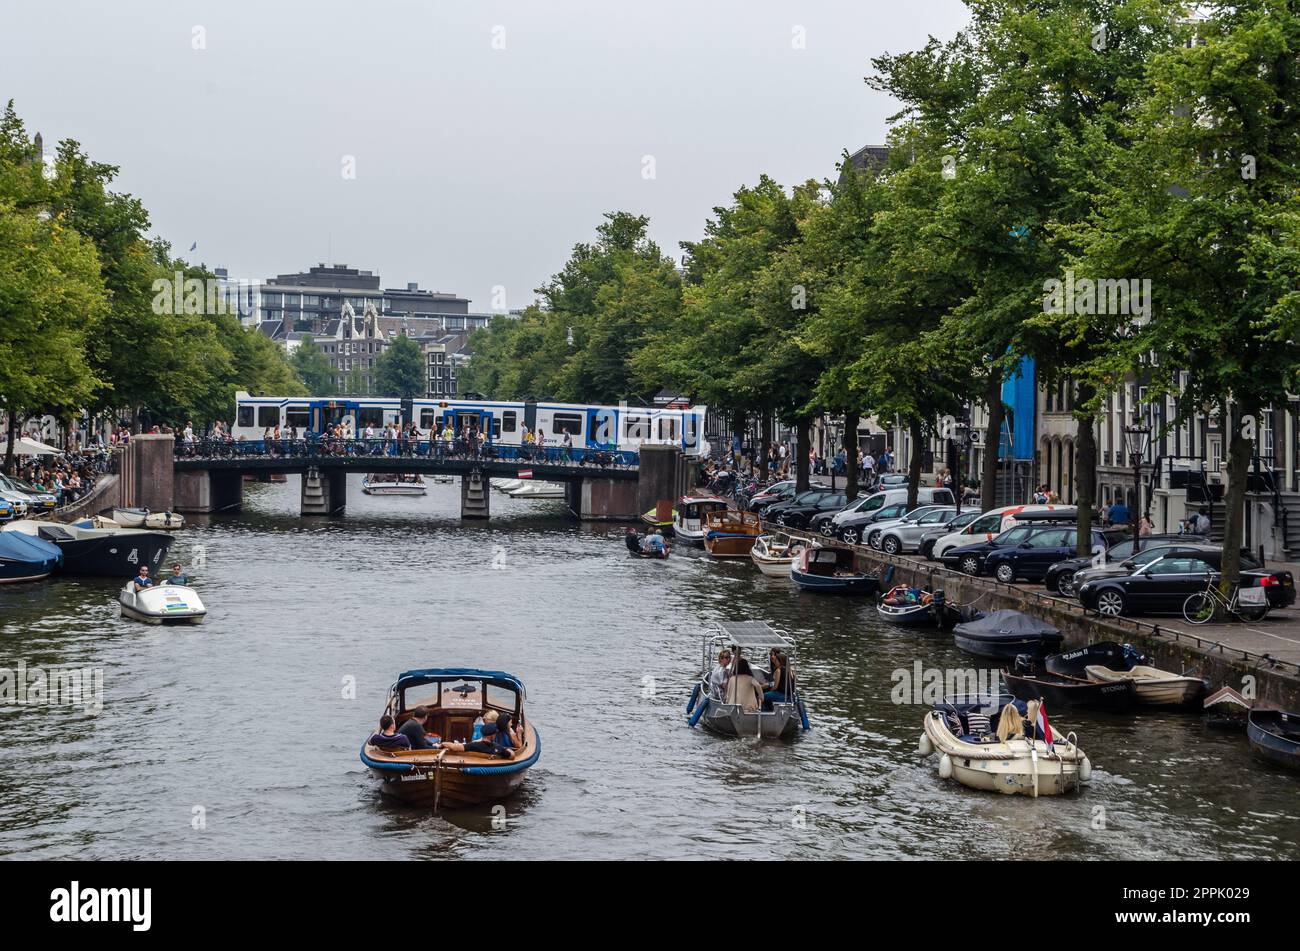 AMSTERDAM, THE NETHERLANDS - AUGUST 24, 2013: Urban landscape in Amsterdam, the Netherlands, view of streets and canals in the famous Canal District, designated as a UNESCO World Heritage Site Stock Photo